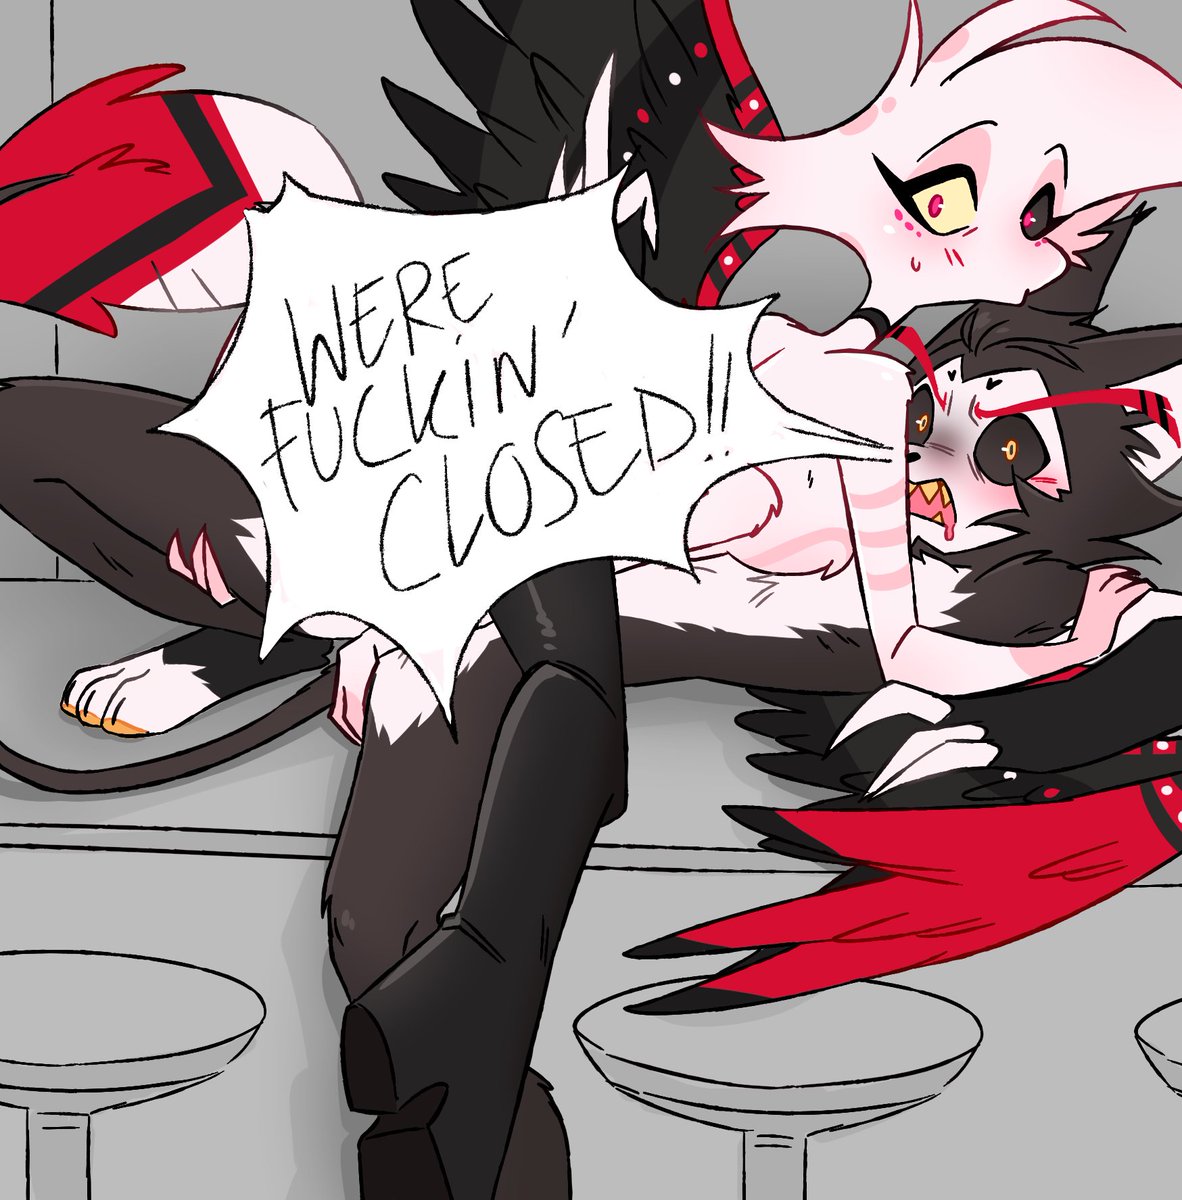 cw // explicit nudity, alcohol and fuckin :>

.
.
.
.
.
.

i dub this series 'bar hopping' (im so unserious about explicit works) 

3 full works in post below👇 #huskerdust #HazbinHotelFanart